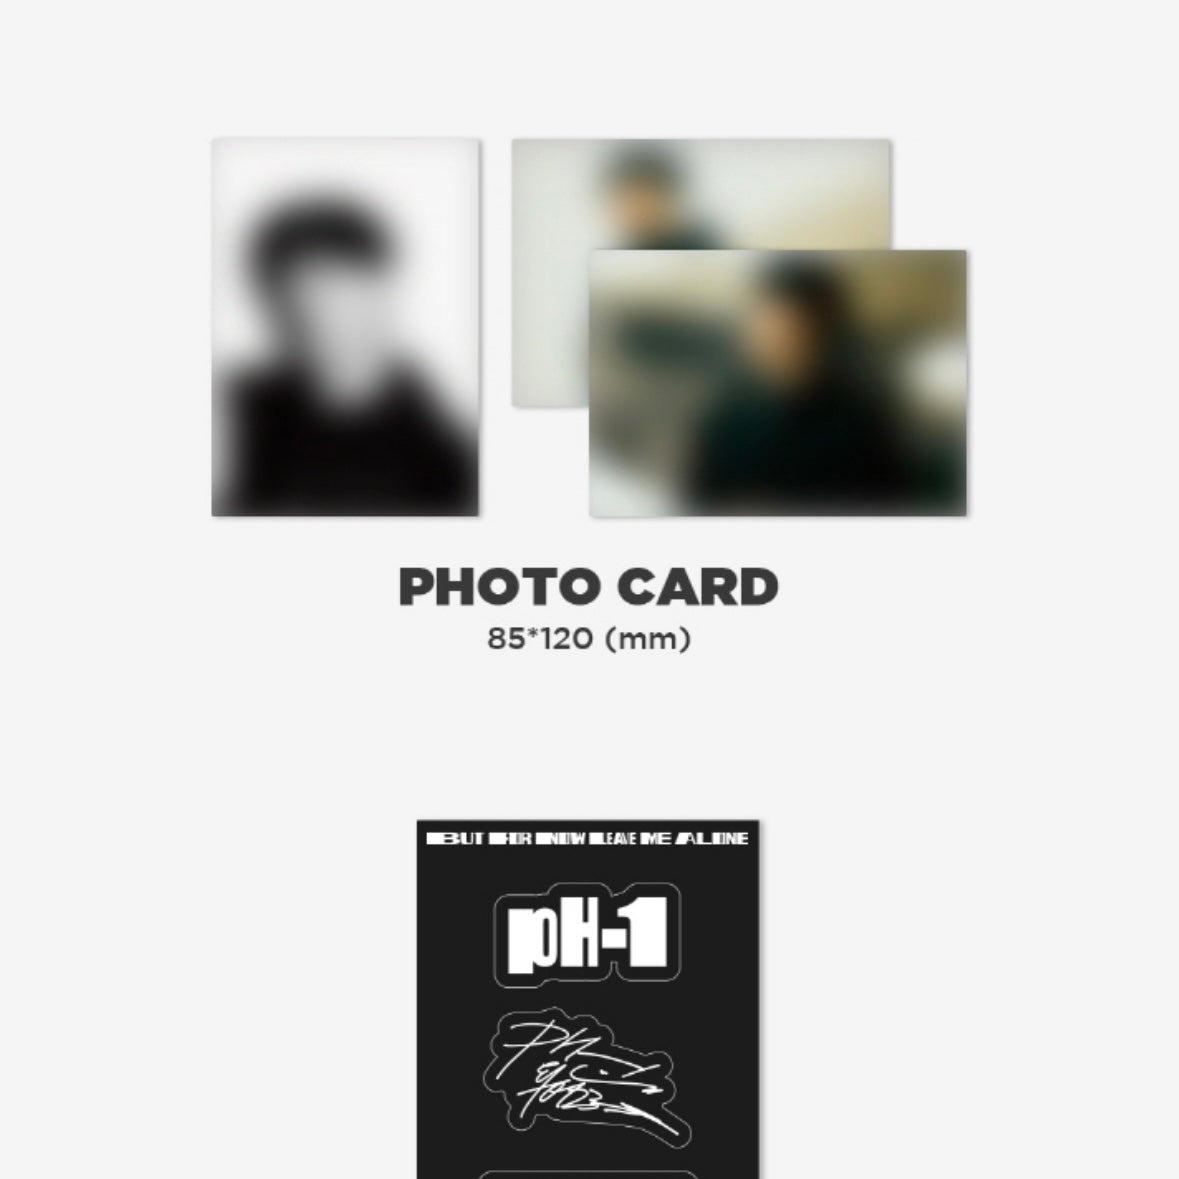 PH-1 - VOL.2 [BUT FOR NOW LEAVE ME ALONE] KIT ALBUM